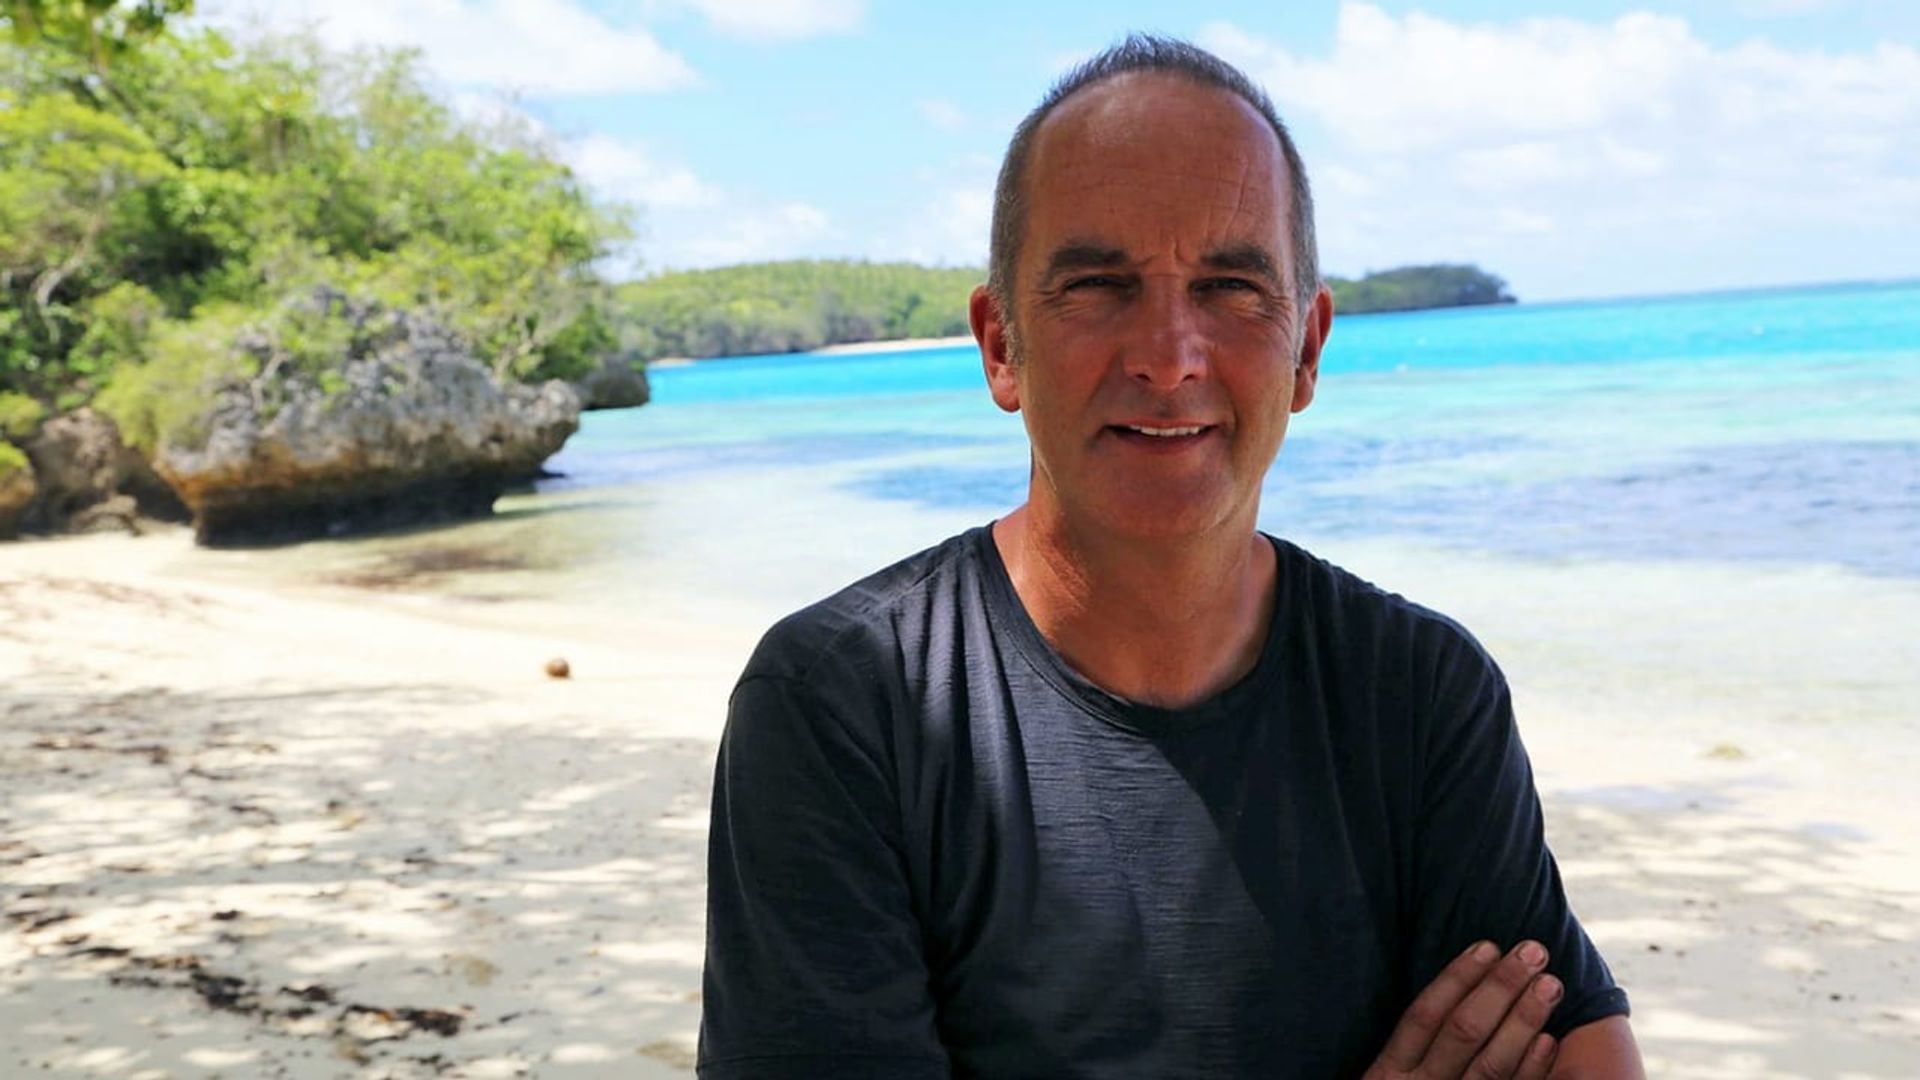 Kevin McCloud's Escape to the Wild background